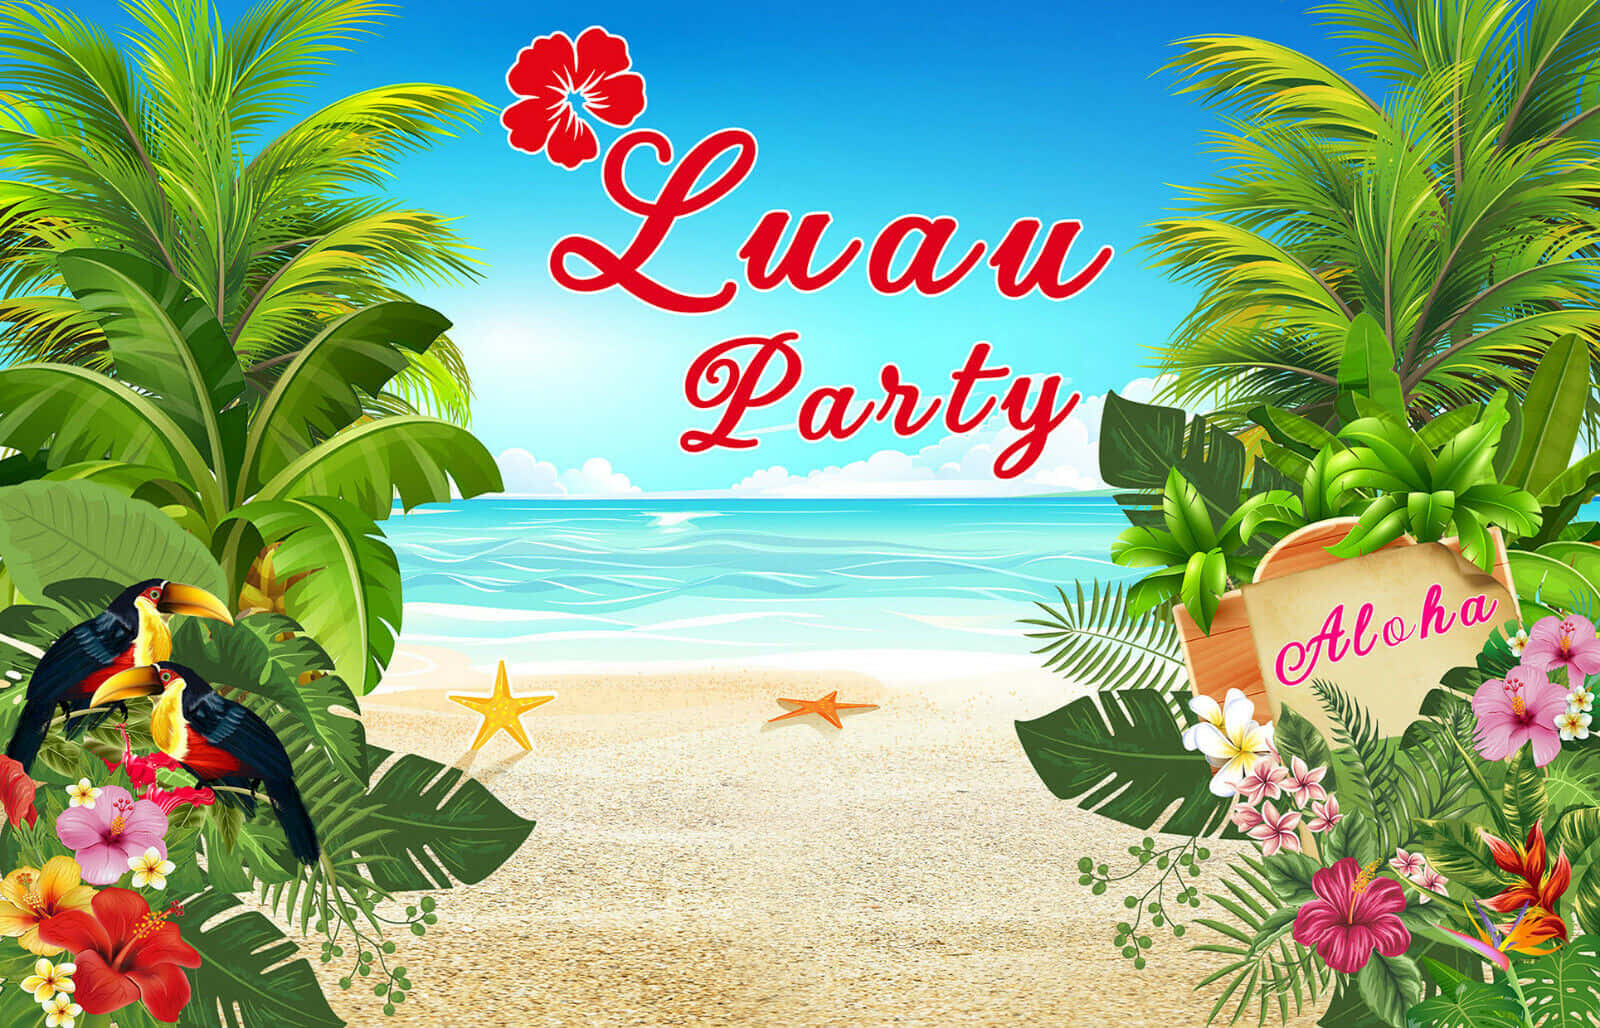 Experience the Bright Colors and Fun of a Luau